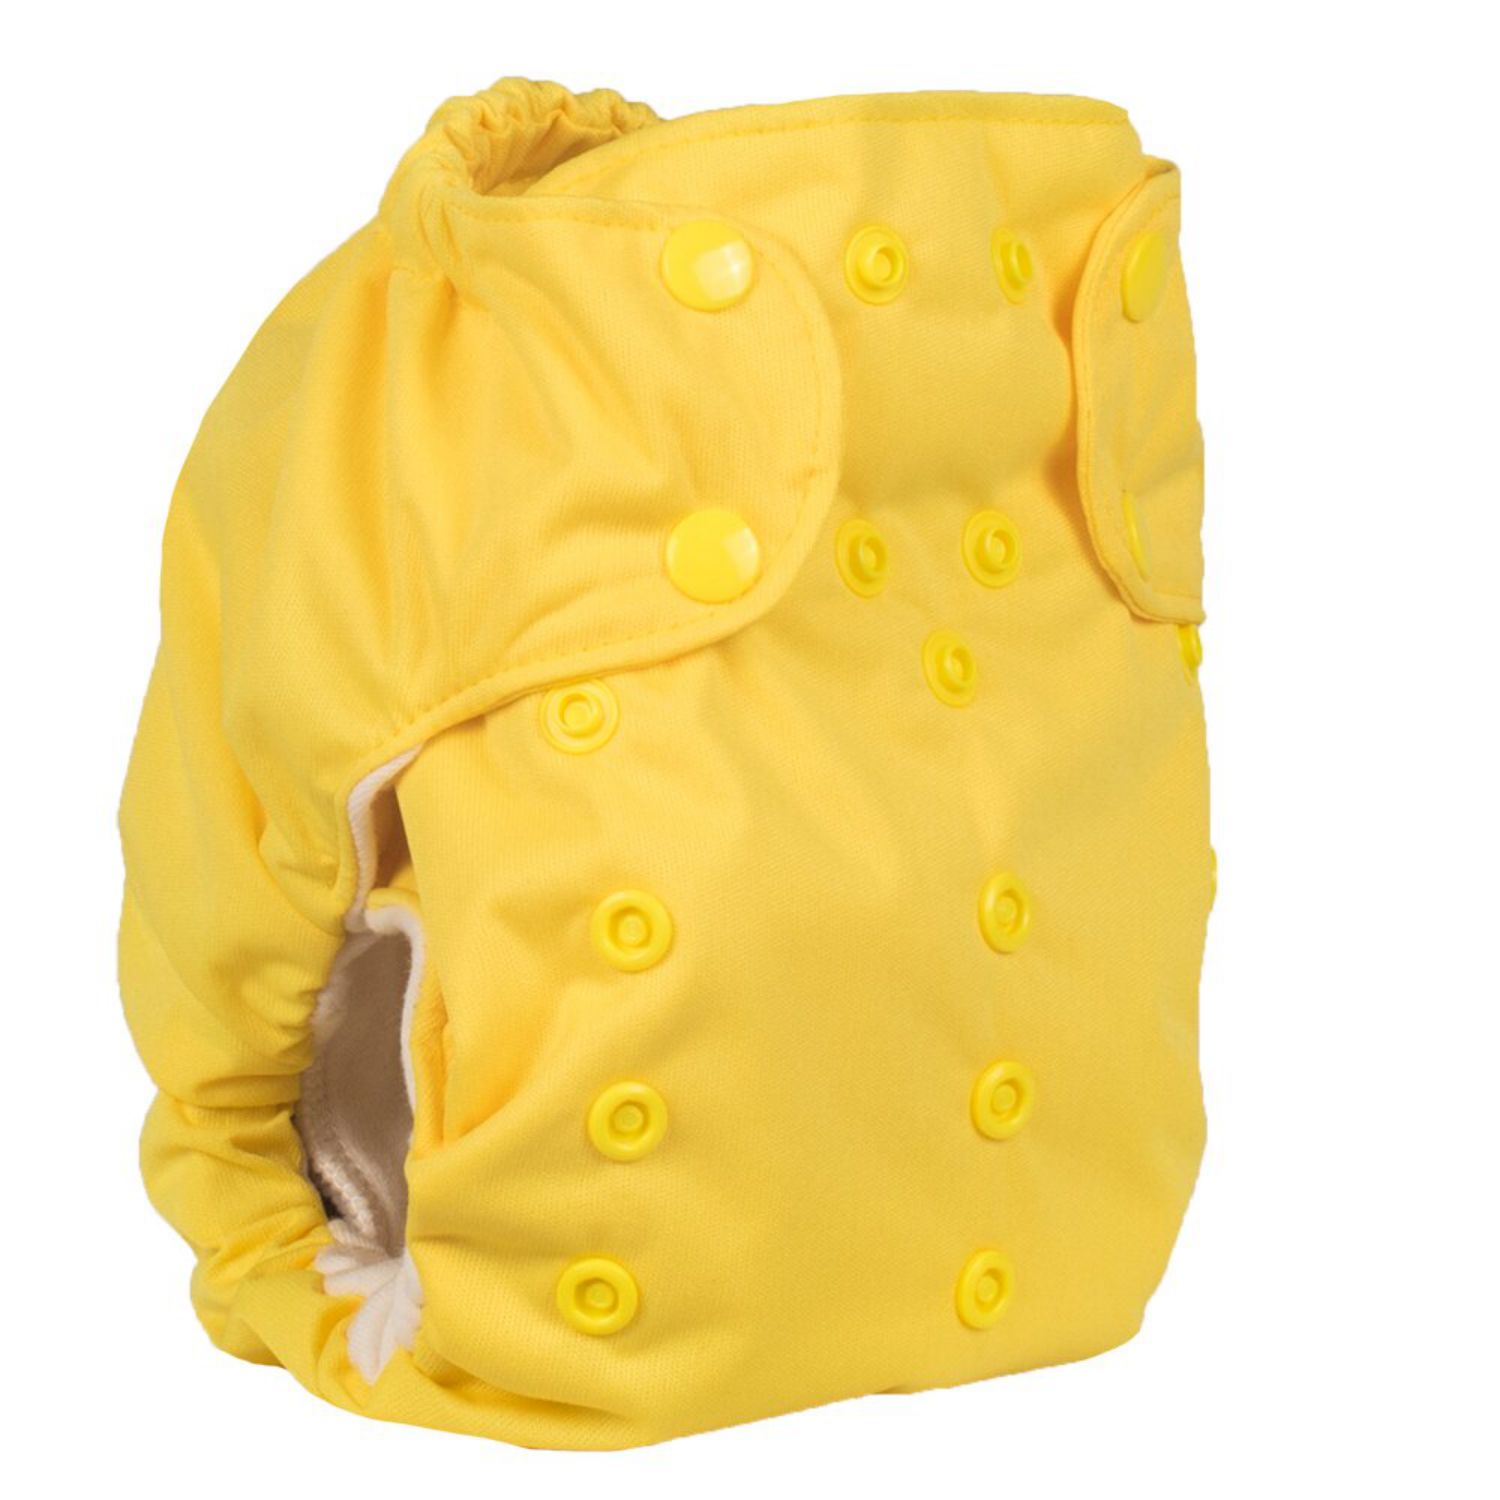 Smart Bottoms 3.1 One Size All-in-One nappy Pattern: Basic Yellow